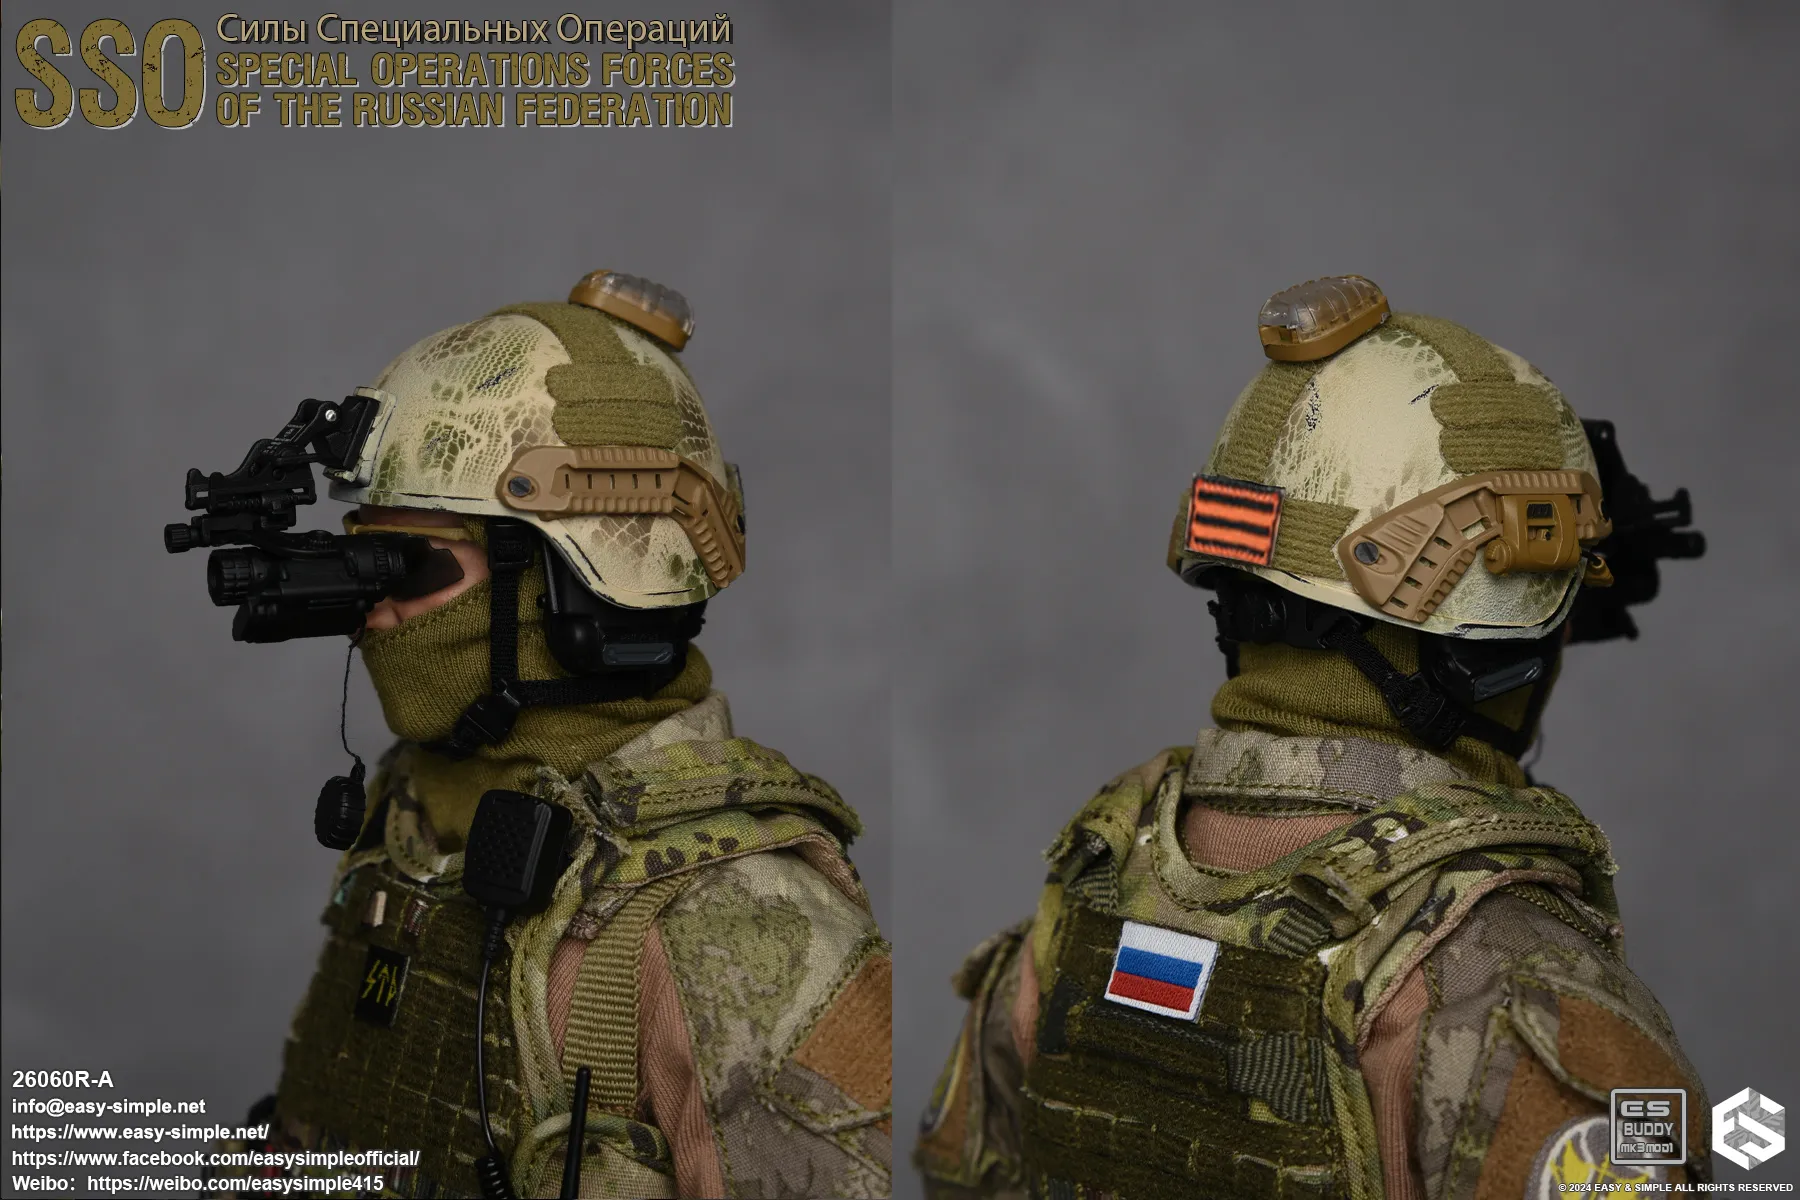 Male - NEW PRODUCT: Easy&Simple 26060R-A Russian Special Operations Forces (SSO) Format,webp